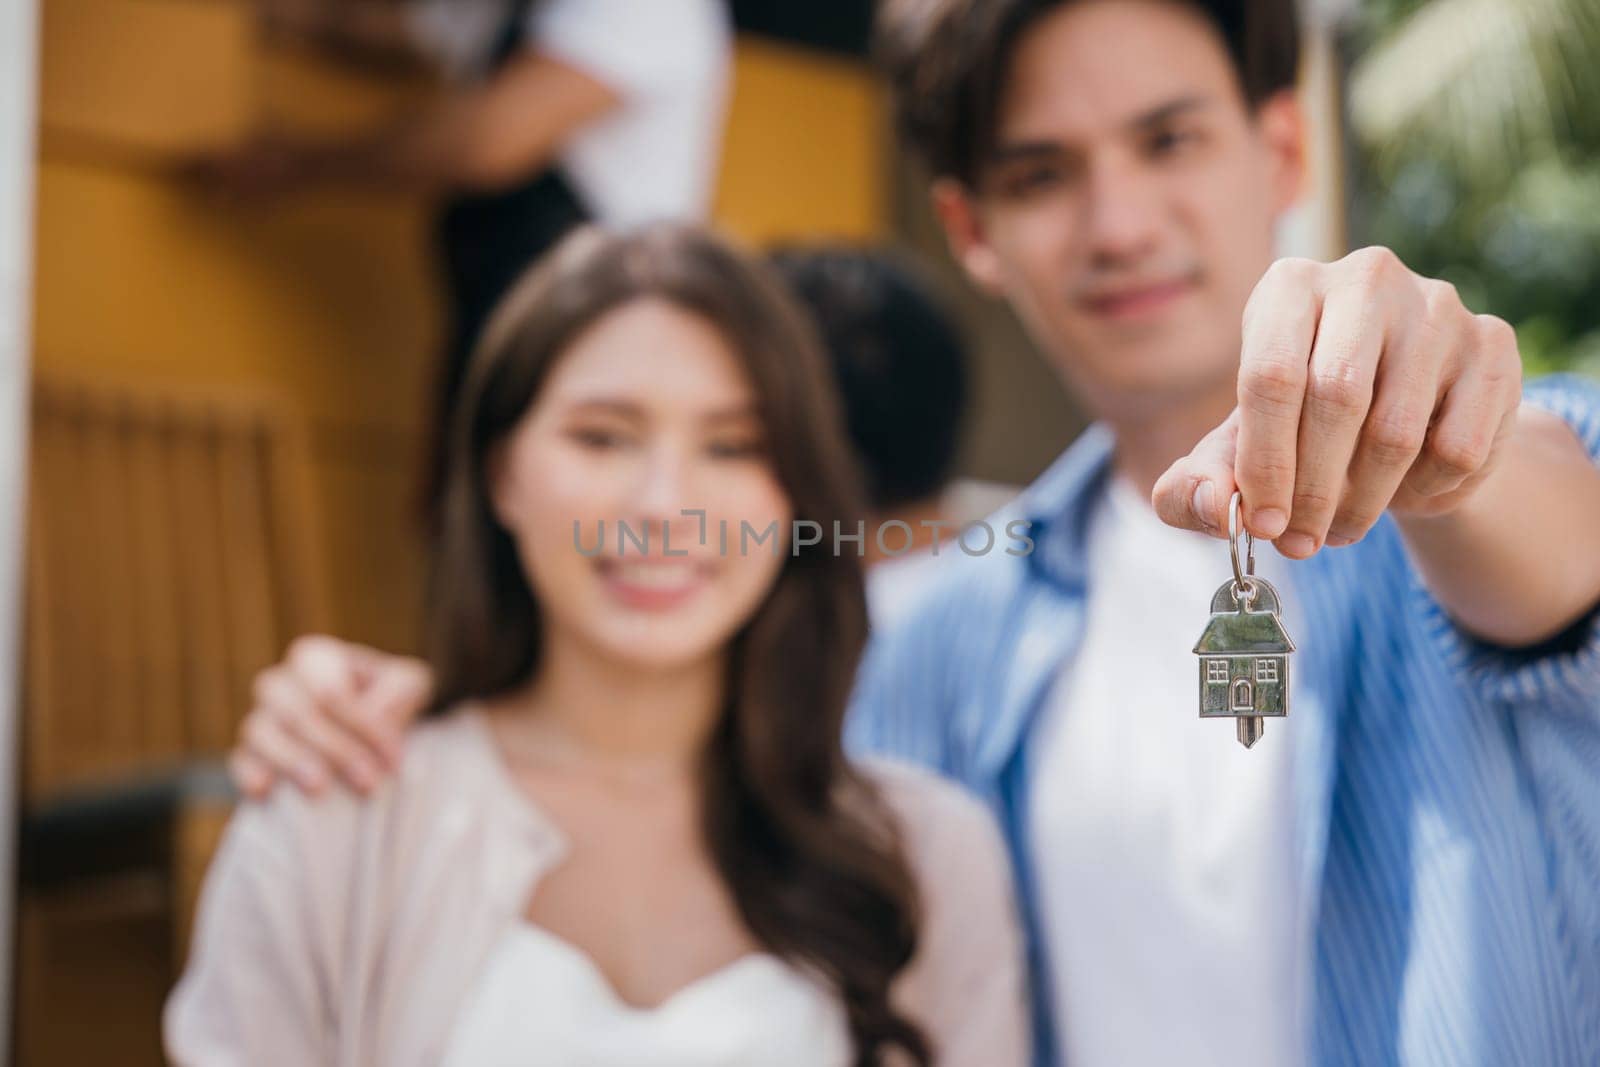 In a moment of success a couple holds keys carrying a mattress into their new home. A joyous relocation captures their happiness. Moving Day Concept by Sorapop